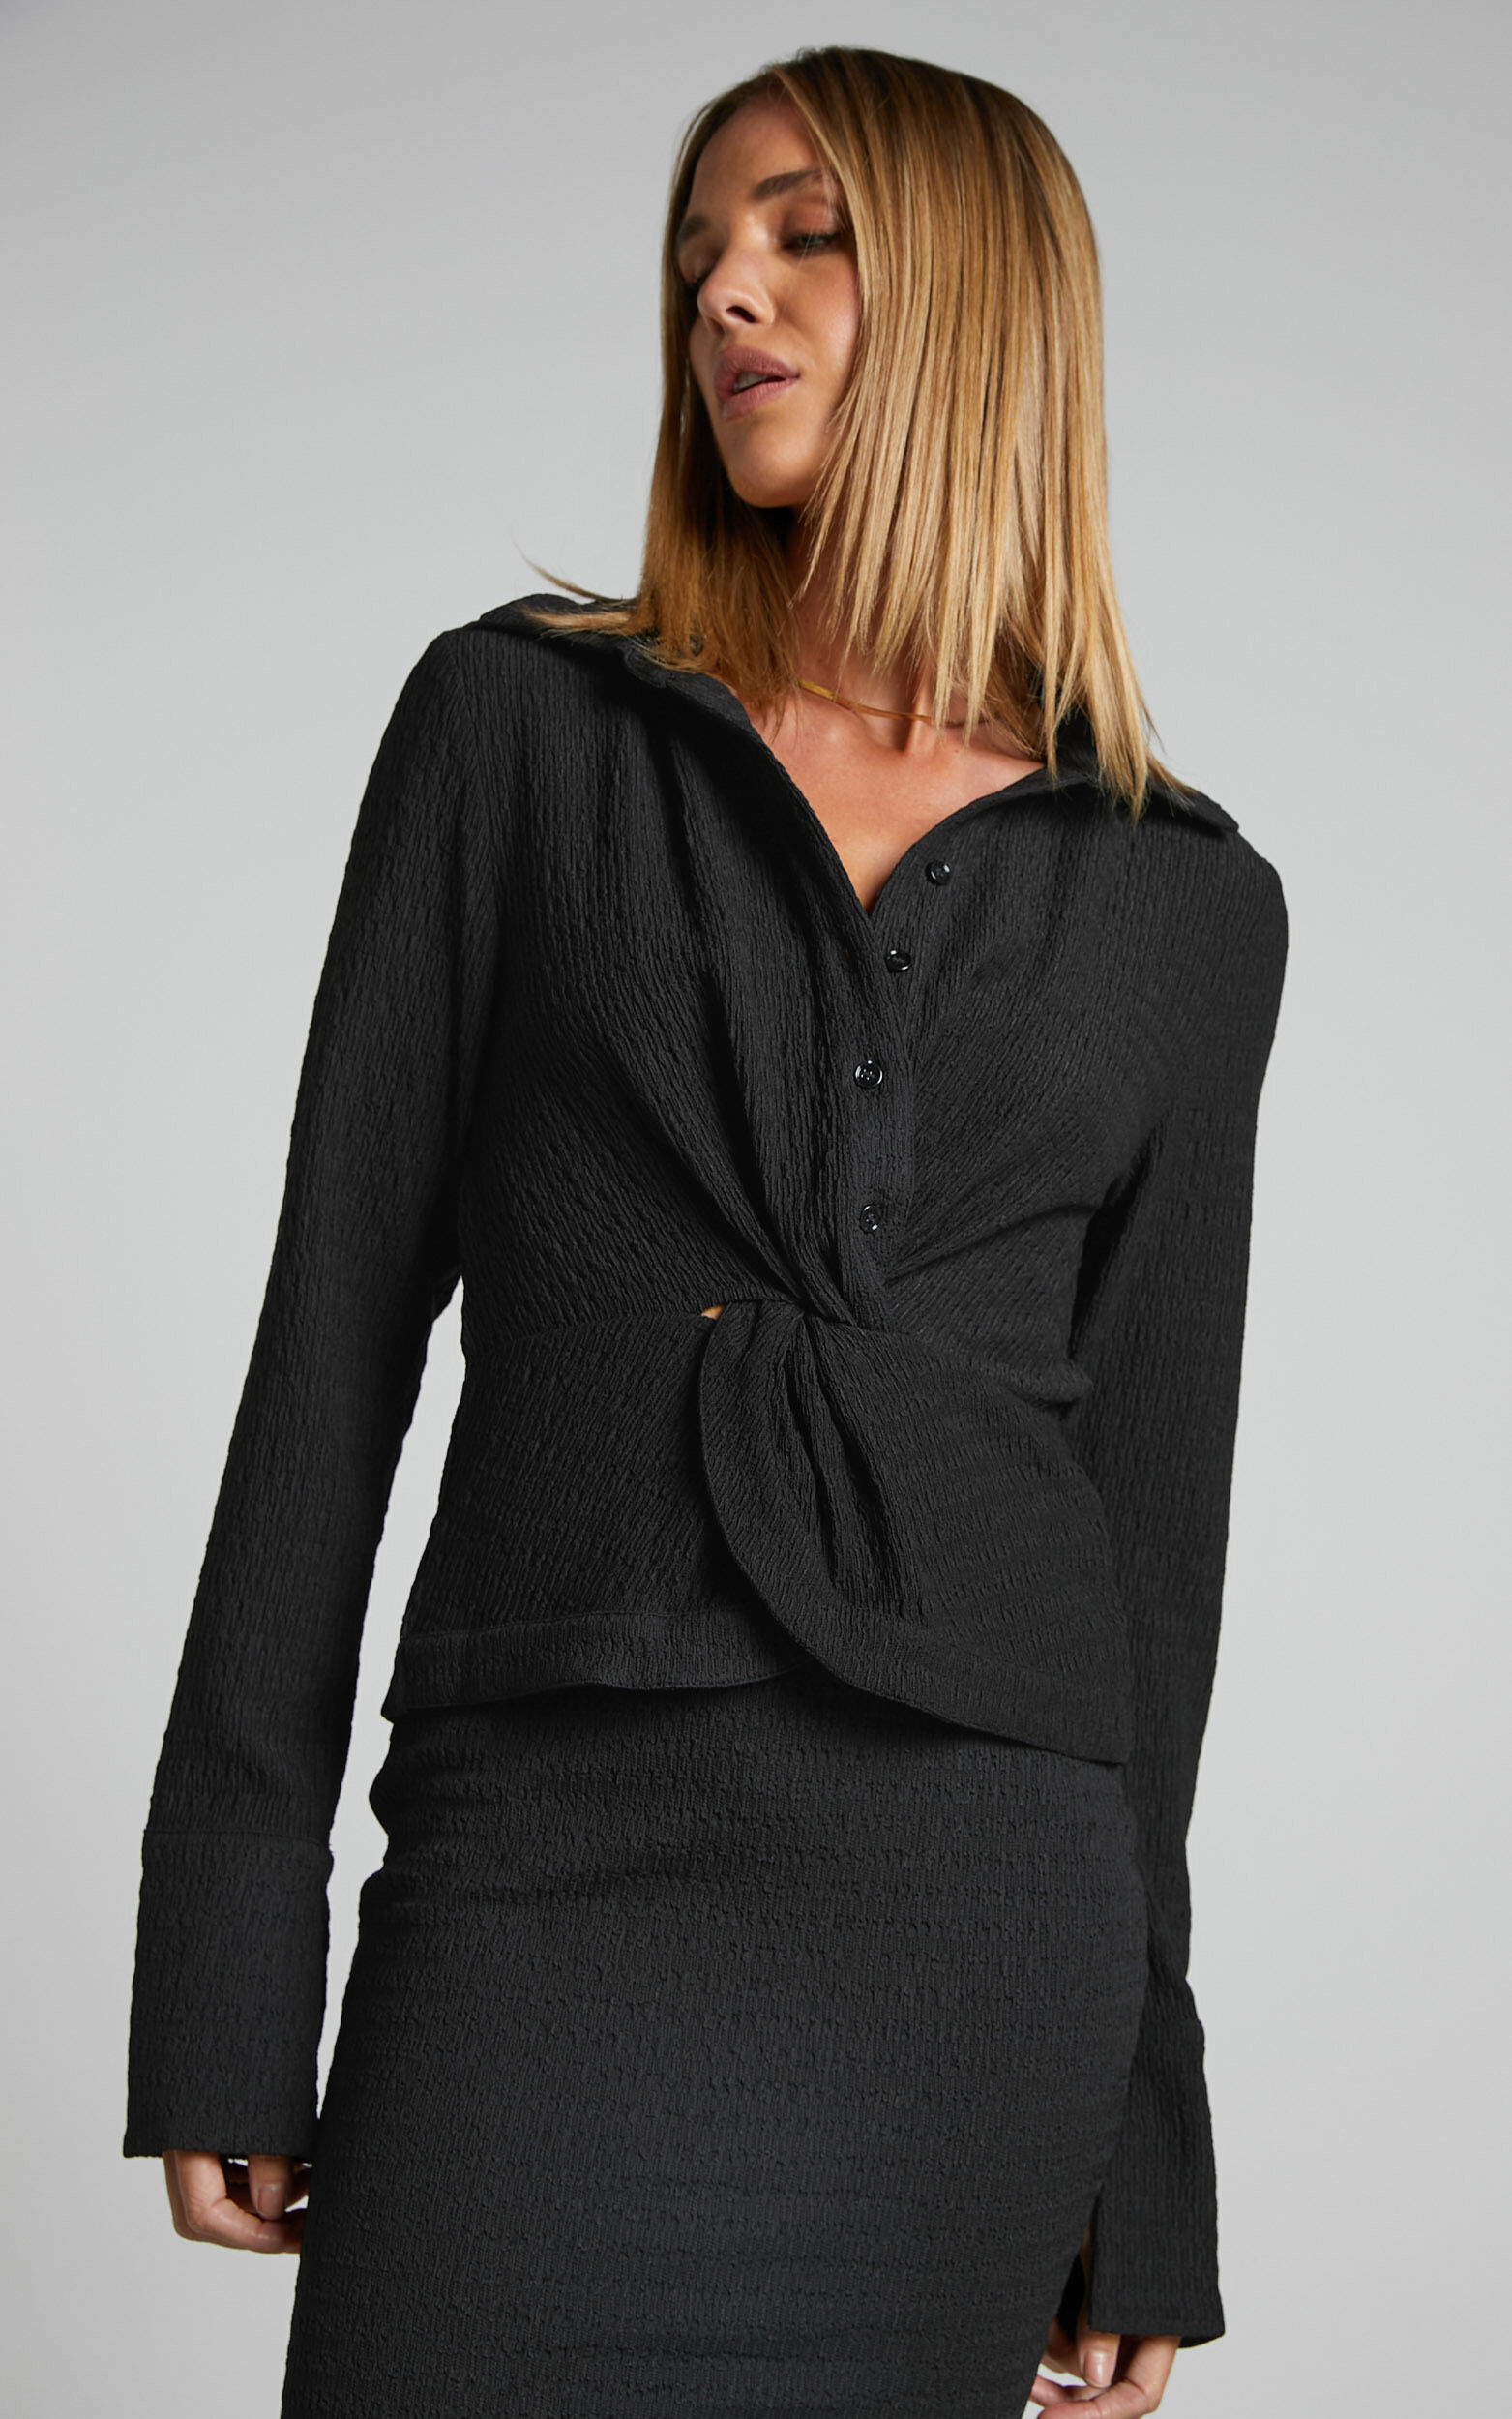 Althea Knot Front Long Sleeve Top in Black - 06, BLK1, super-hi-res image number null